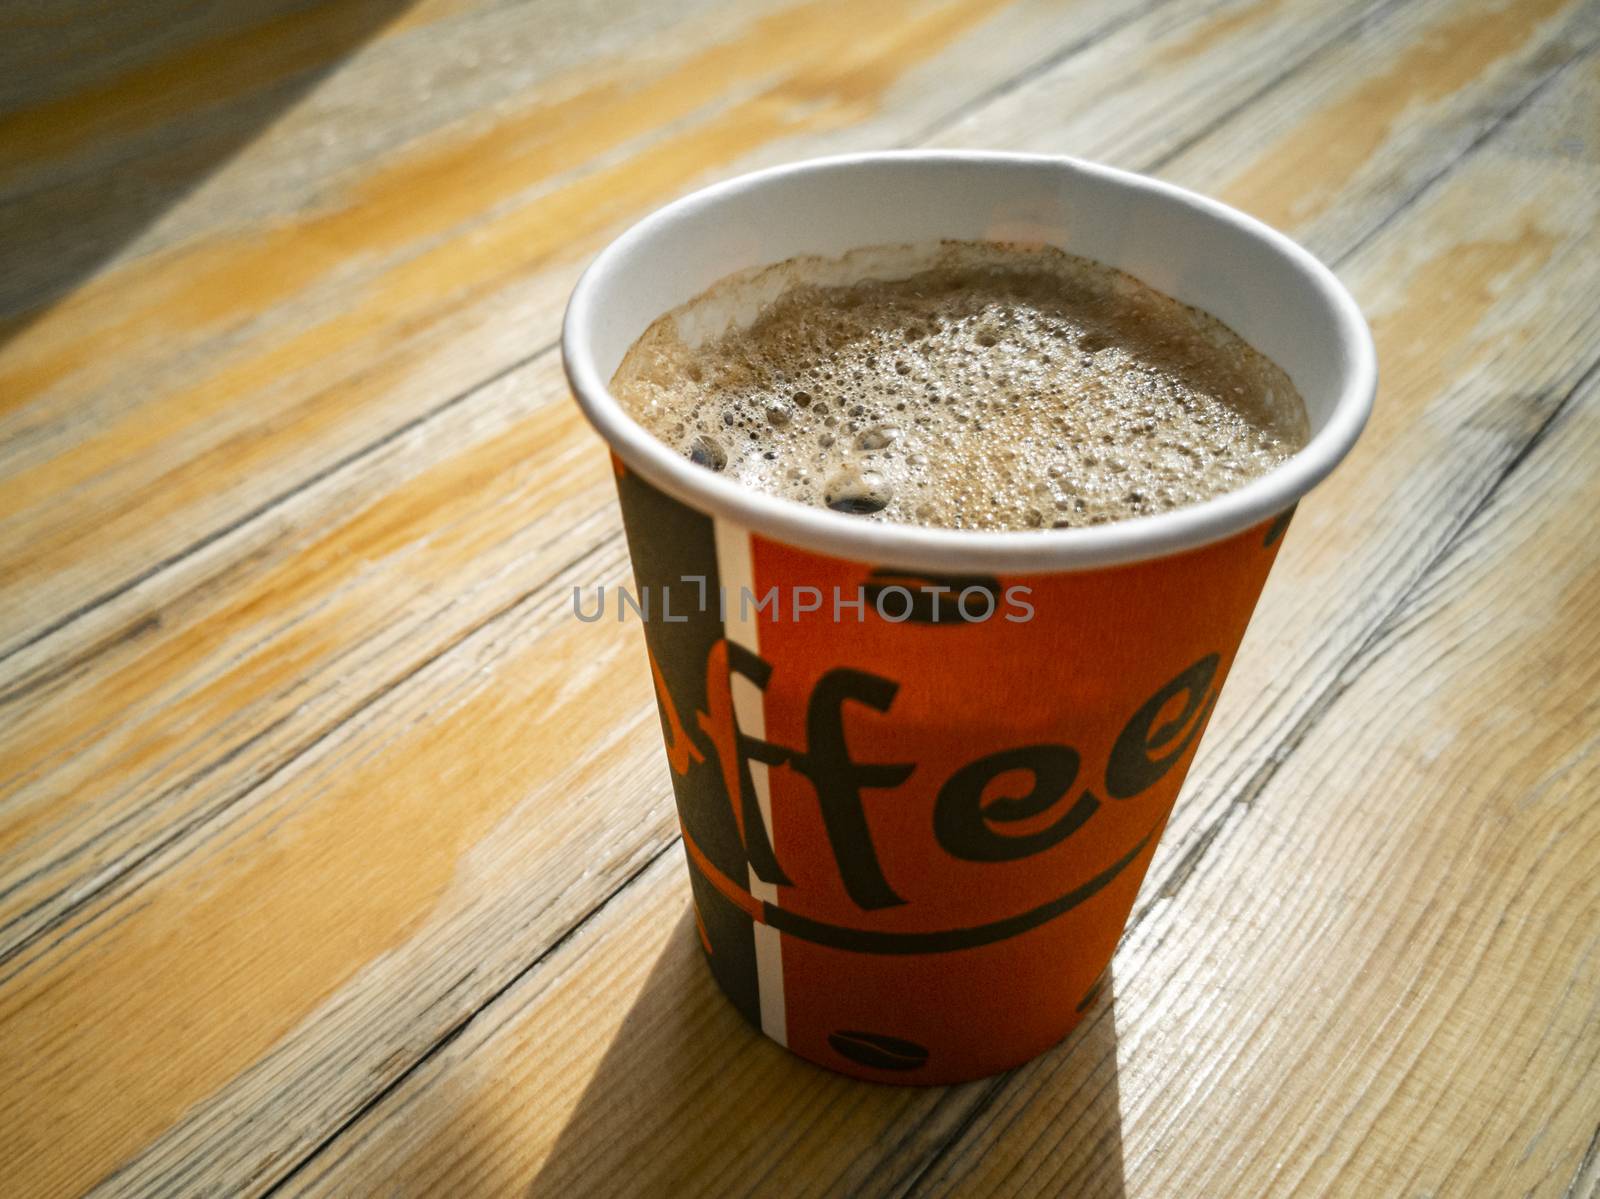 Red paper cup with coffee to go. Leherheide, Bremerhaven. by Arkadij